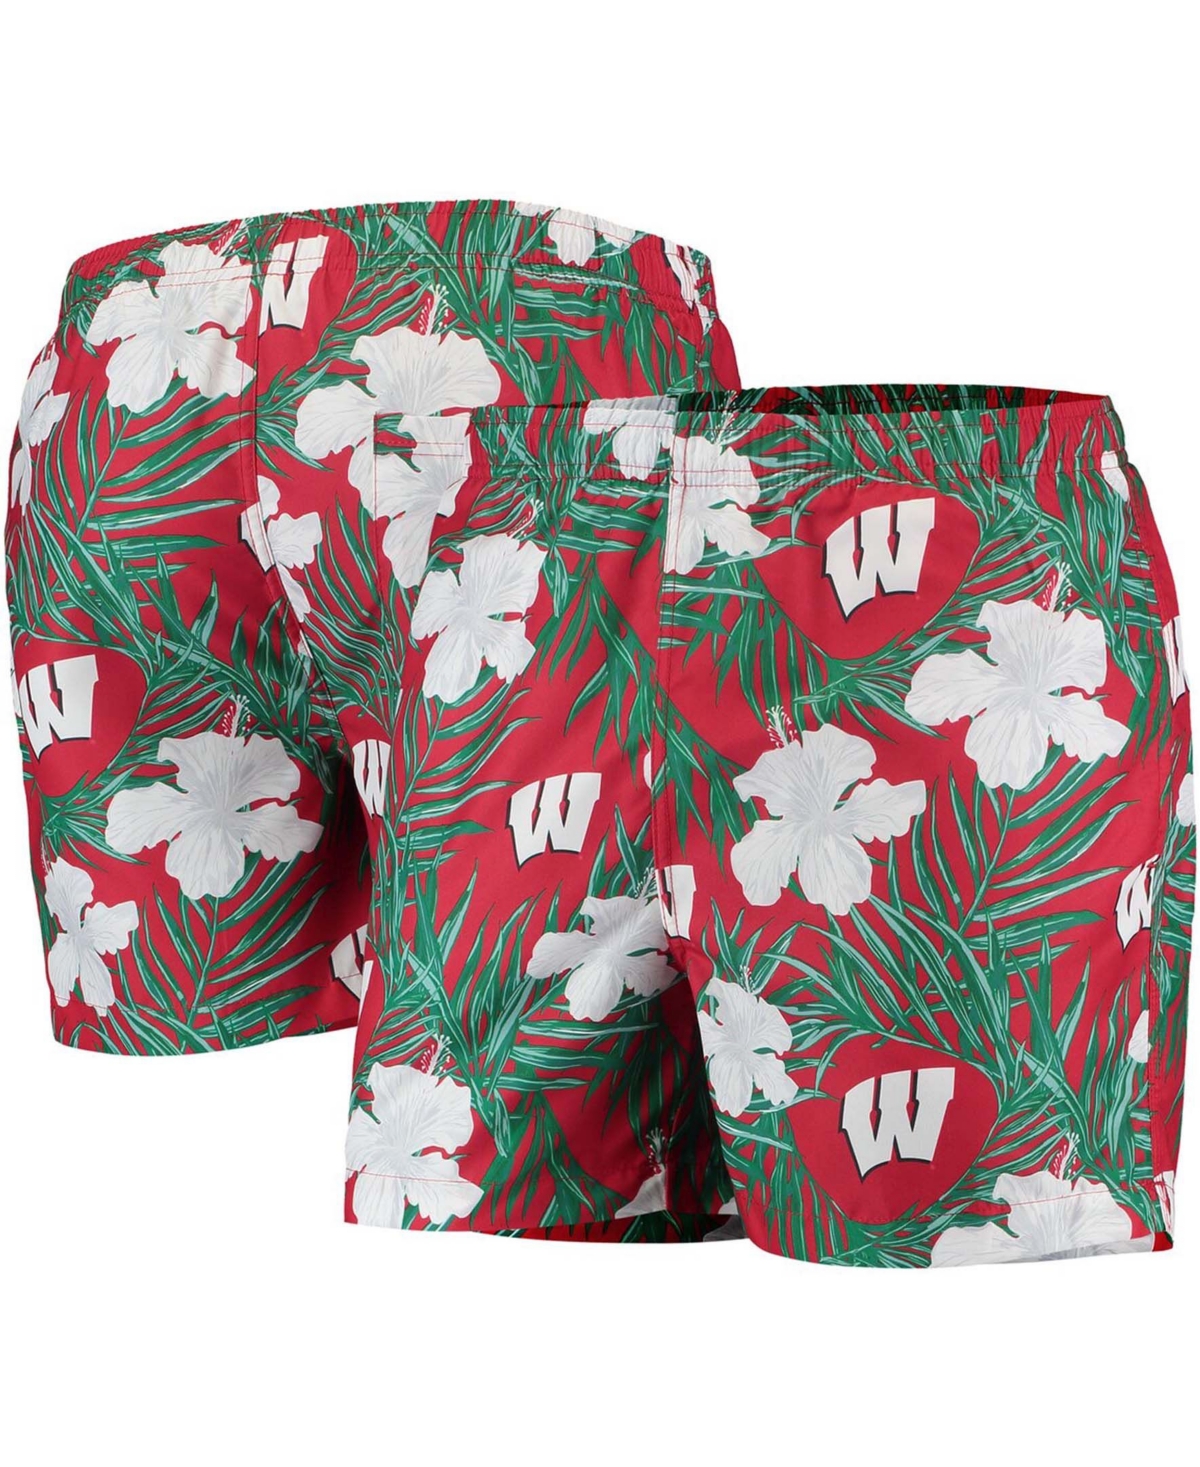 Men's Red Wisconsin Badgers Swimming Trunks - Red